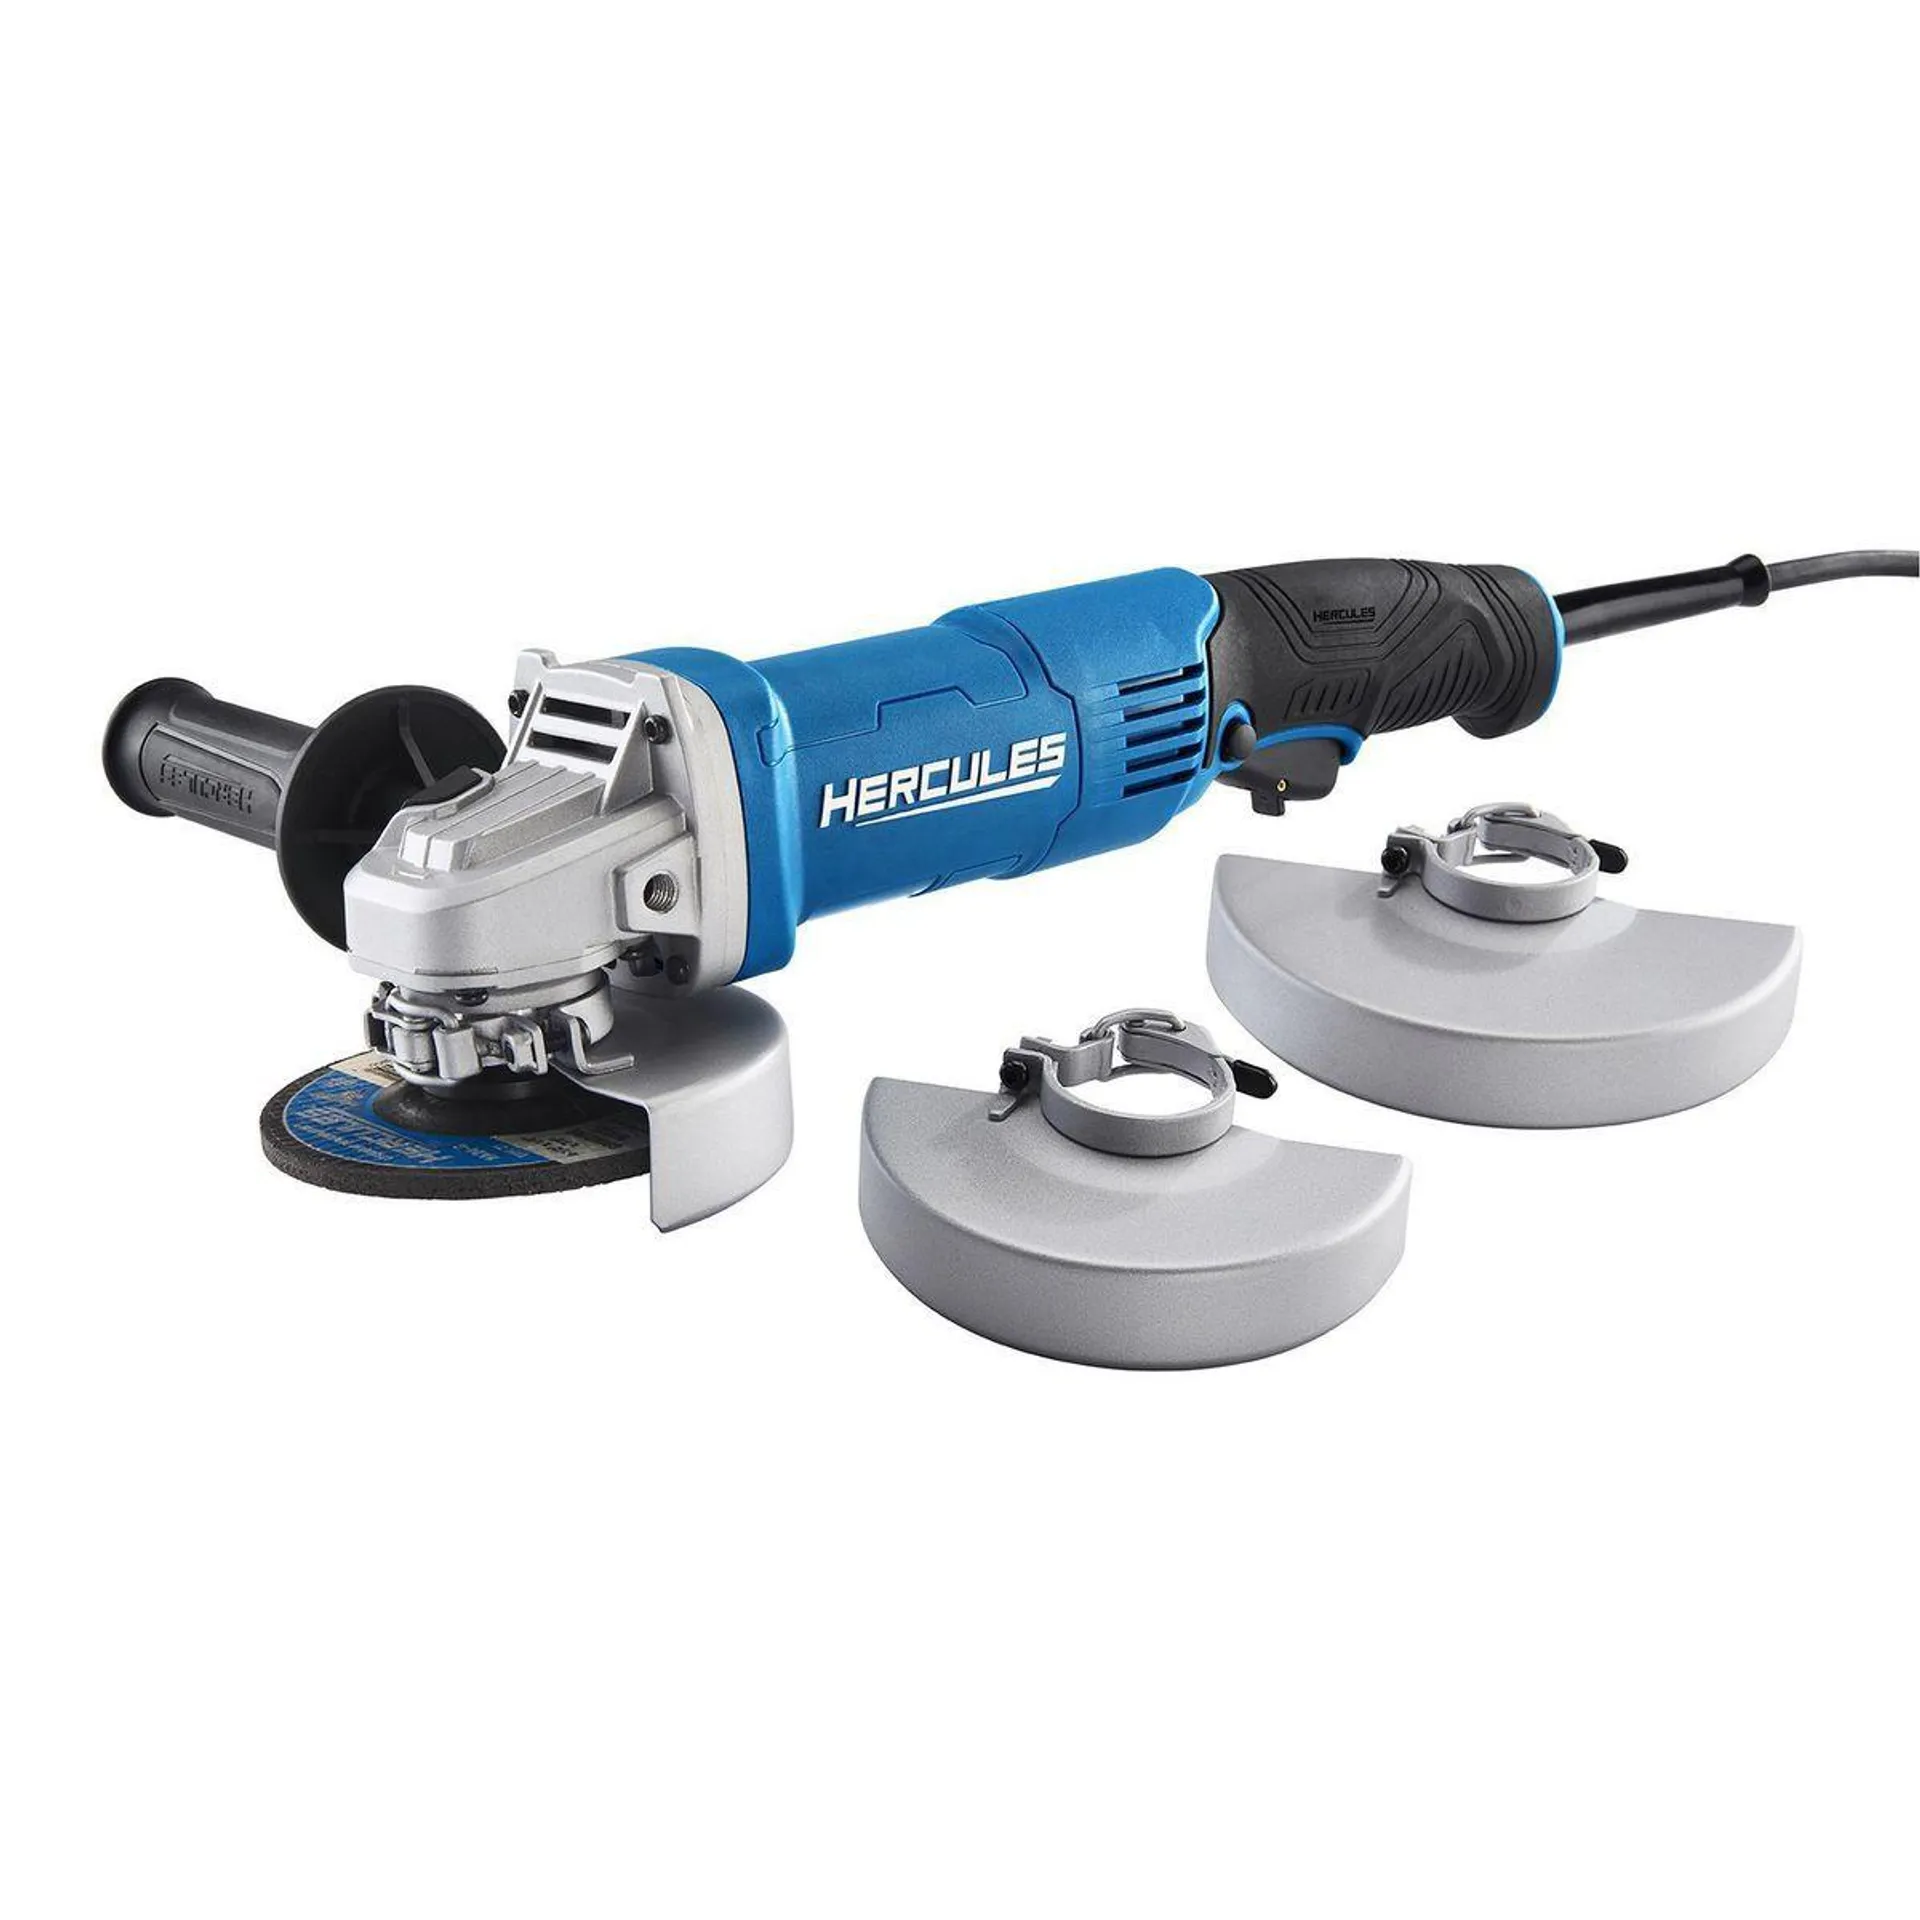 13 Amp 4-1/2 in. to 6 in. Trigger Grip Angle Grinder